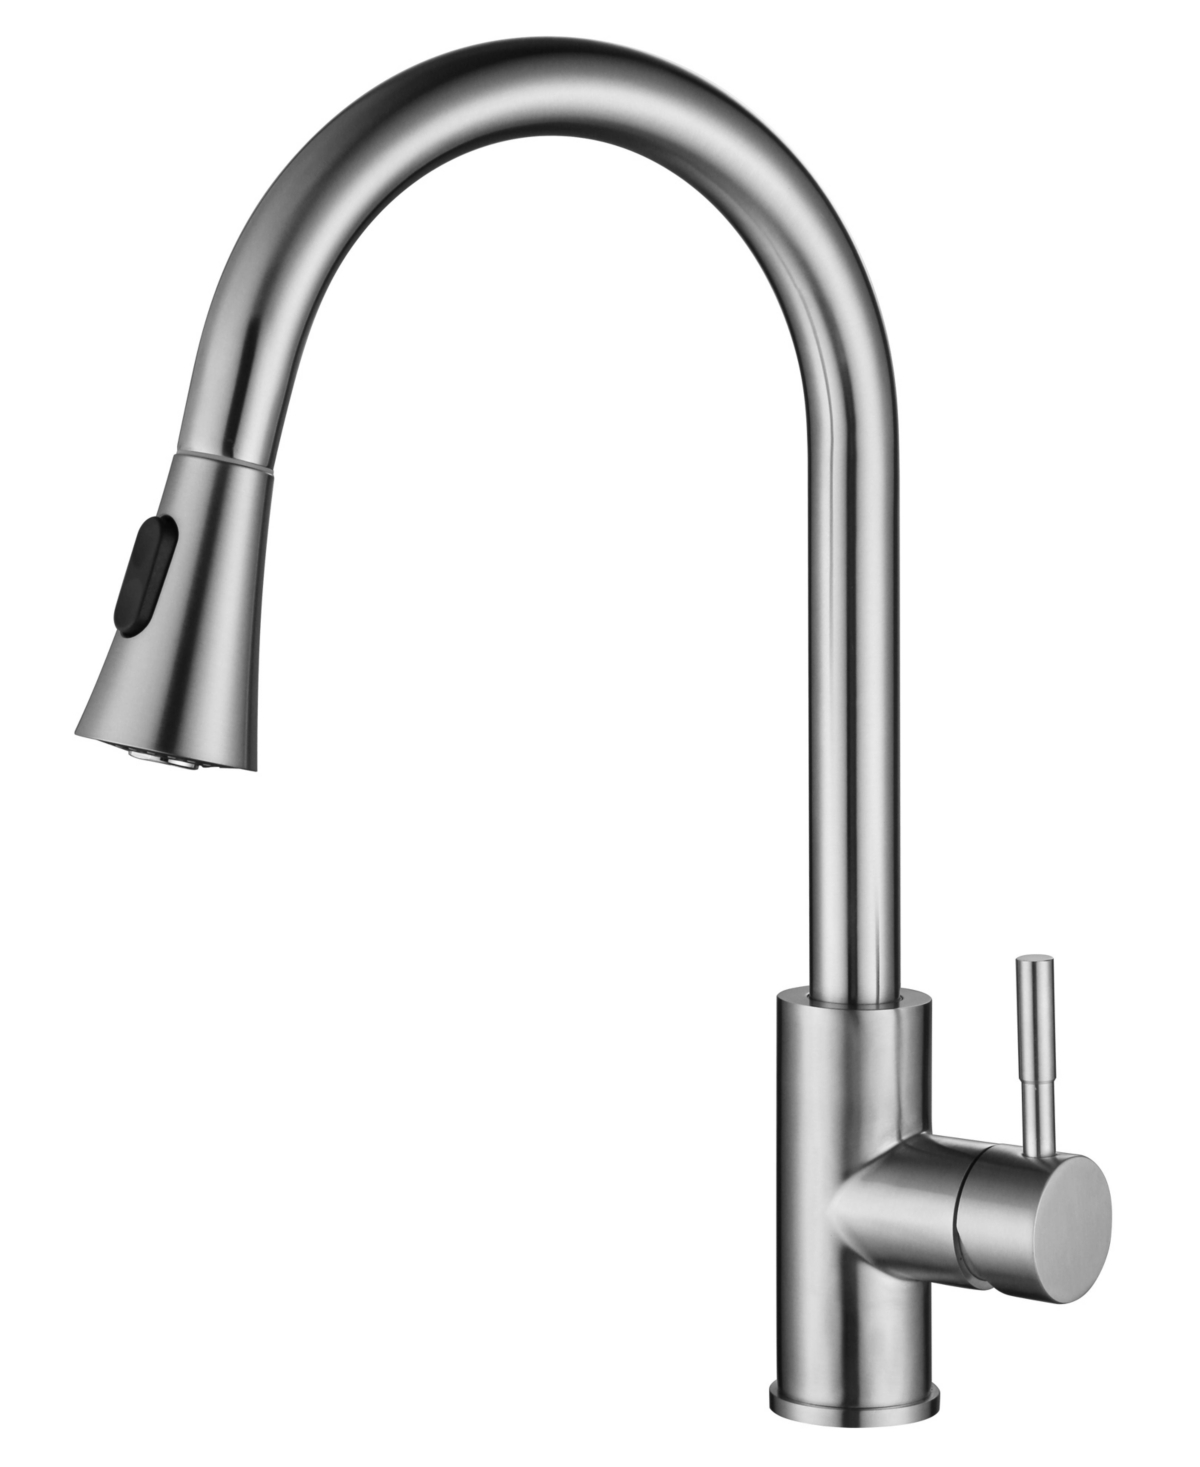 Single Handle High Arc Brushed Nickel Pull Out Kitchen Faucet with Pull Down Sprayer - Silver